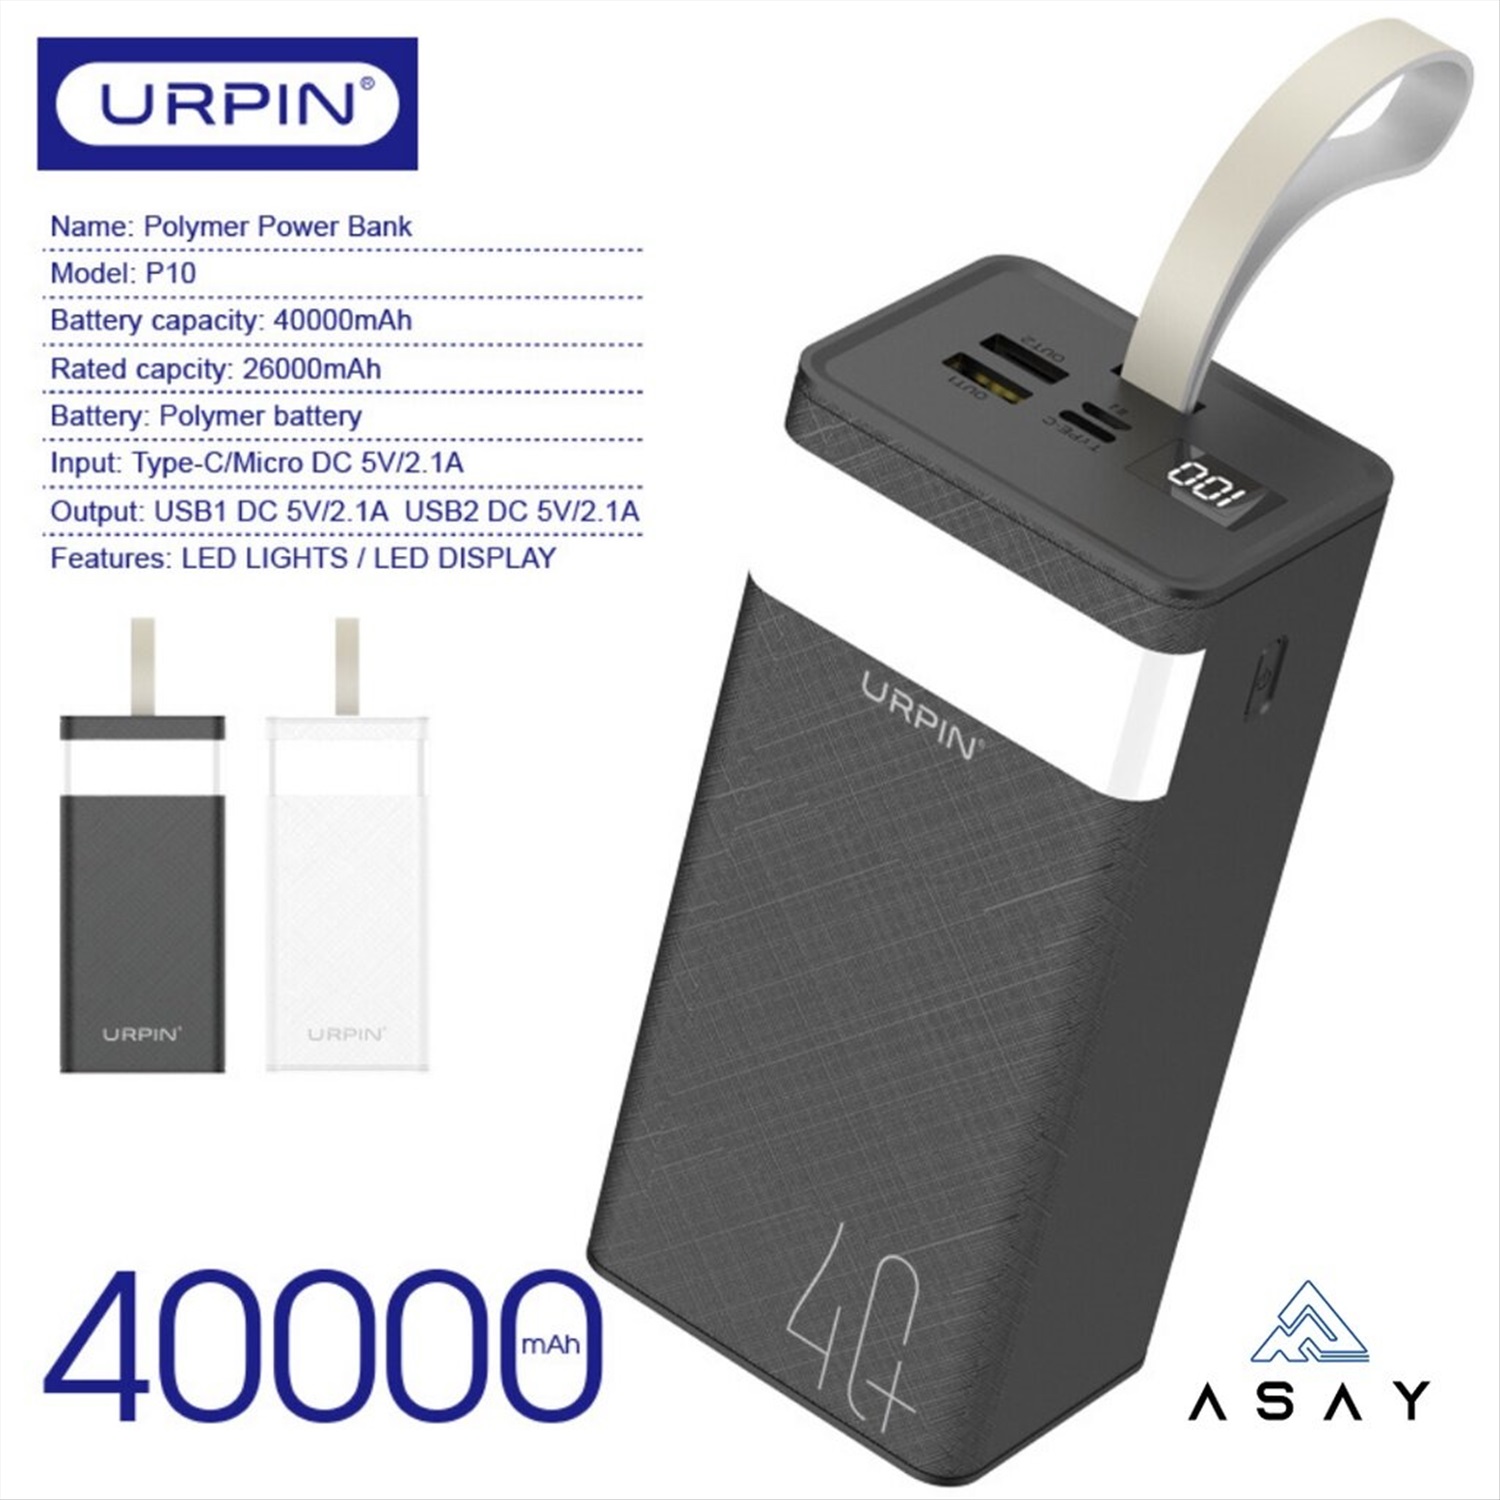 Need Massive Power On-the-Go. : The RAVPower 27000mAh Power Bank May Be the Solution